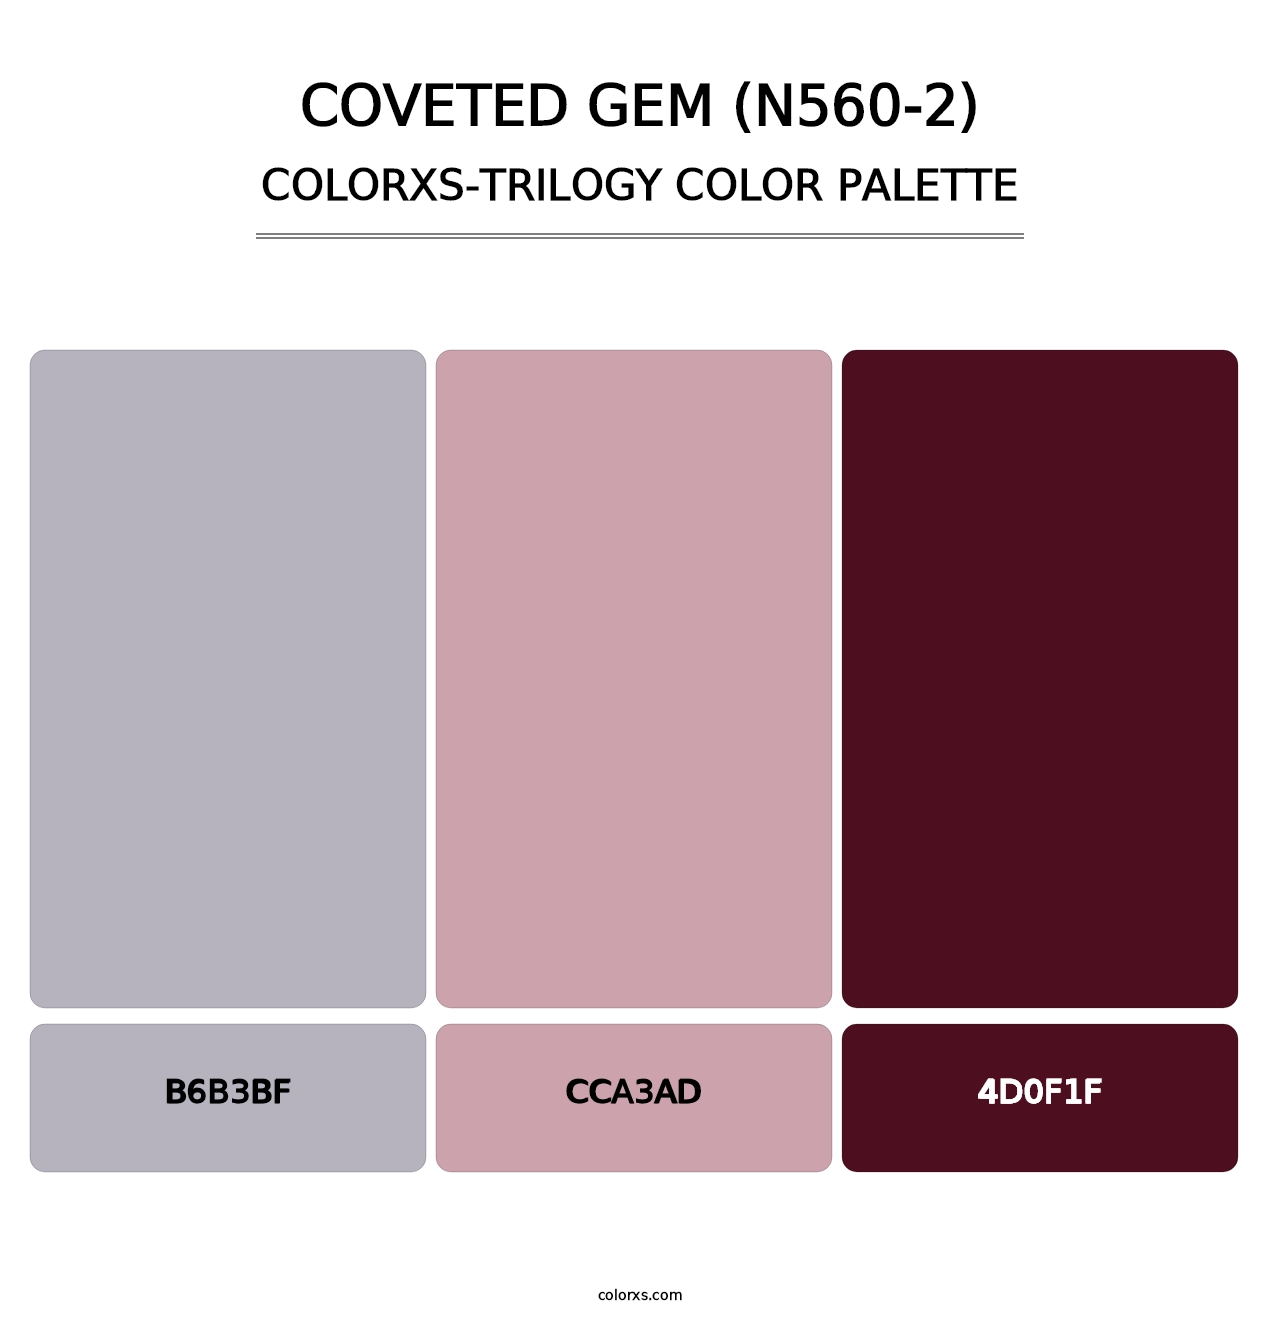 Coveted Gem (N560-2) - Colorxs Trilogy Palette